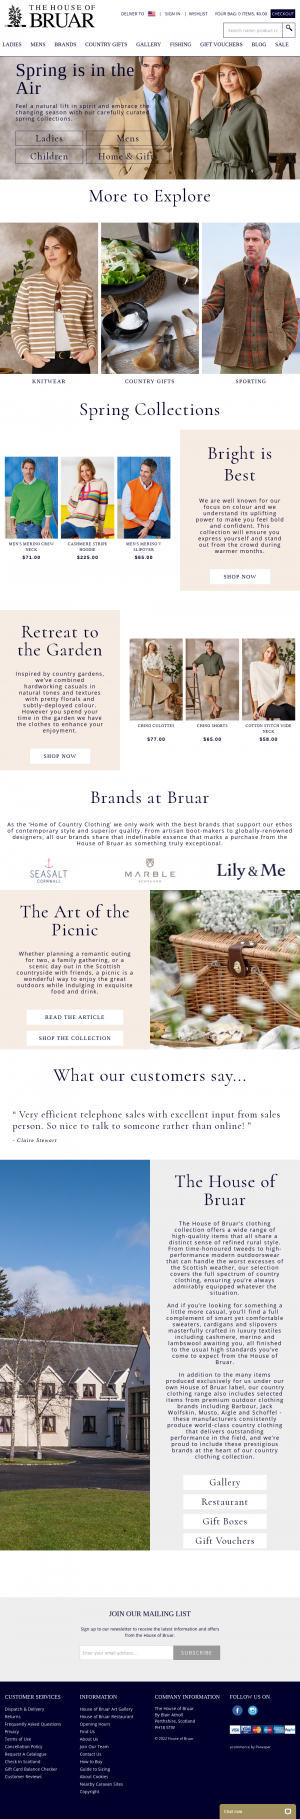 THE HOUSE OF BRUAR website appearance